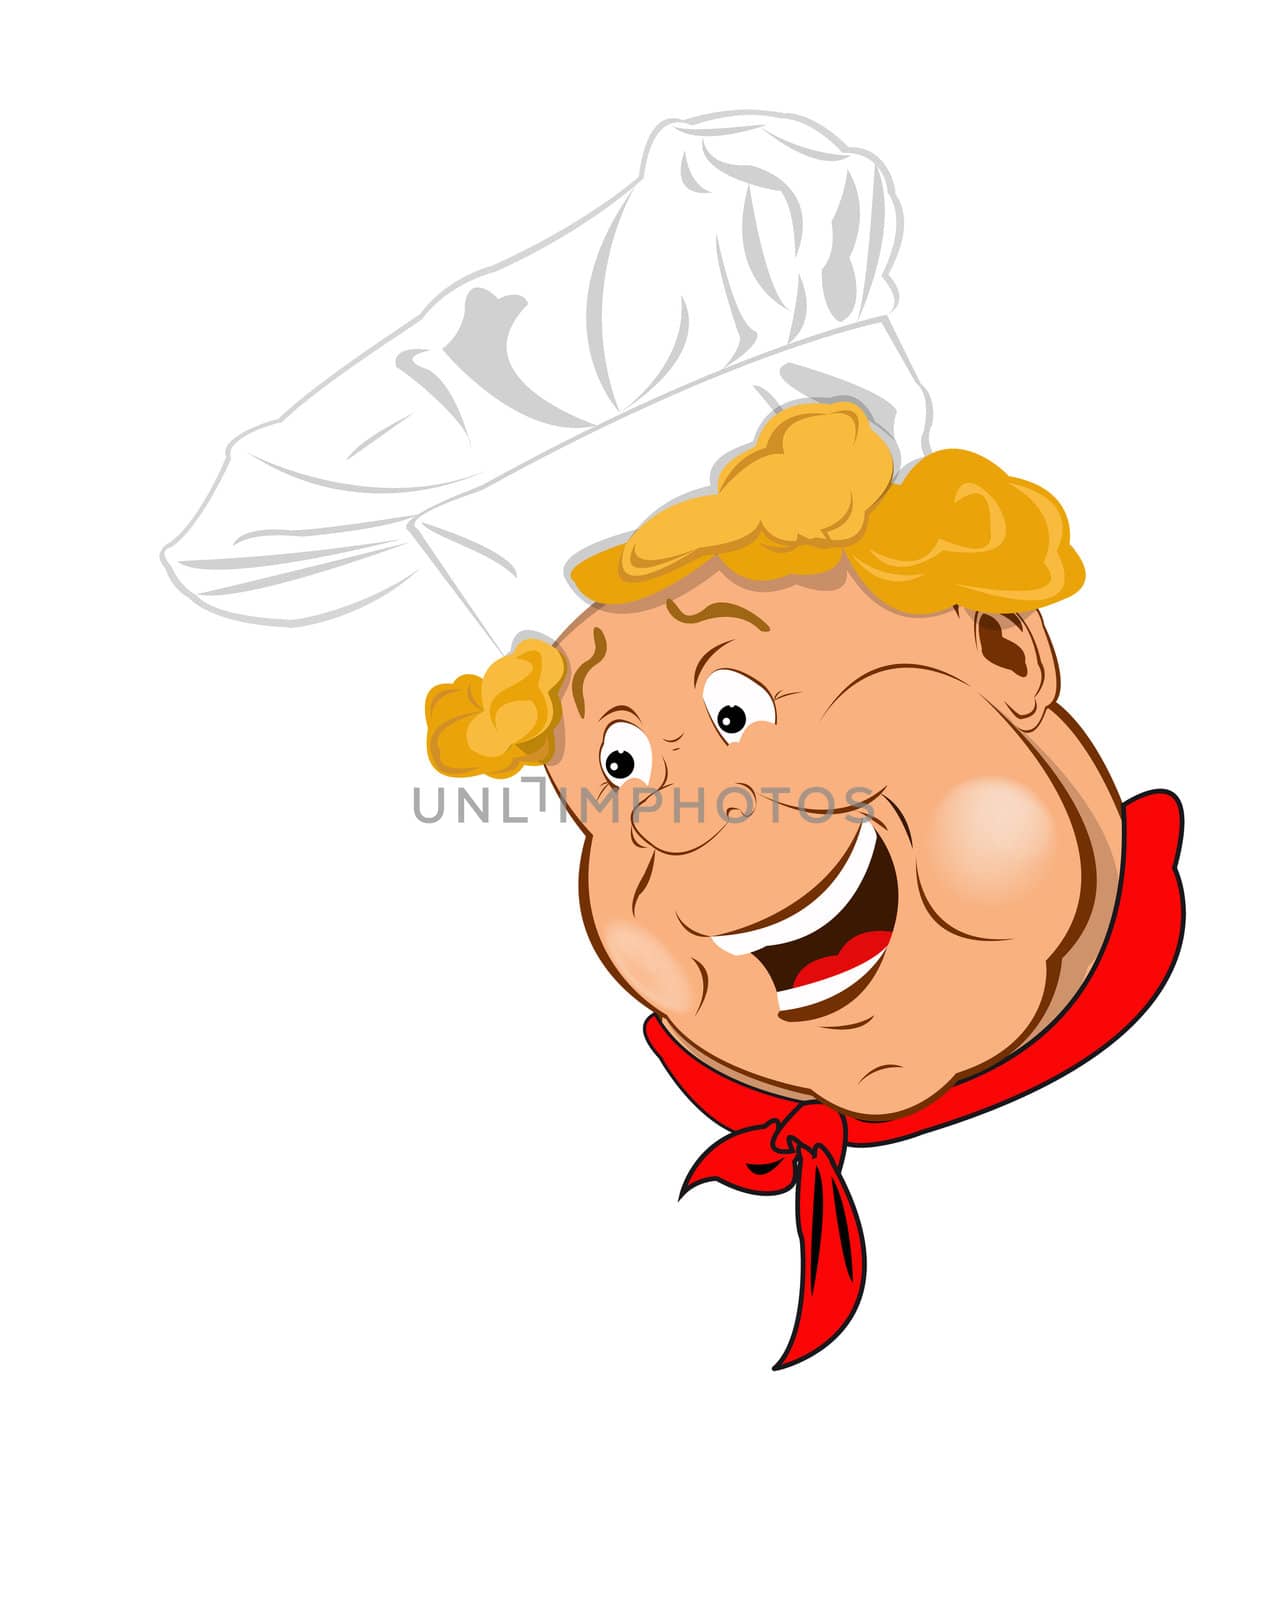 Funny Chef.Face by sergey150770SV